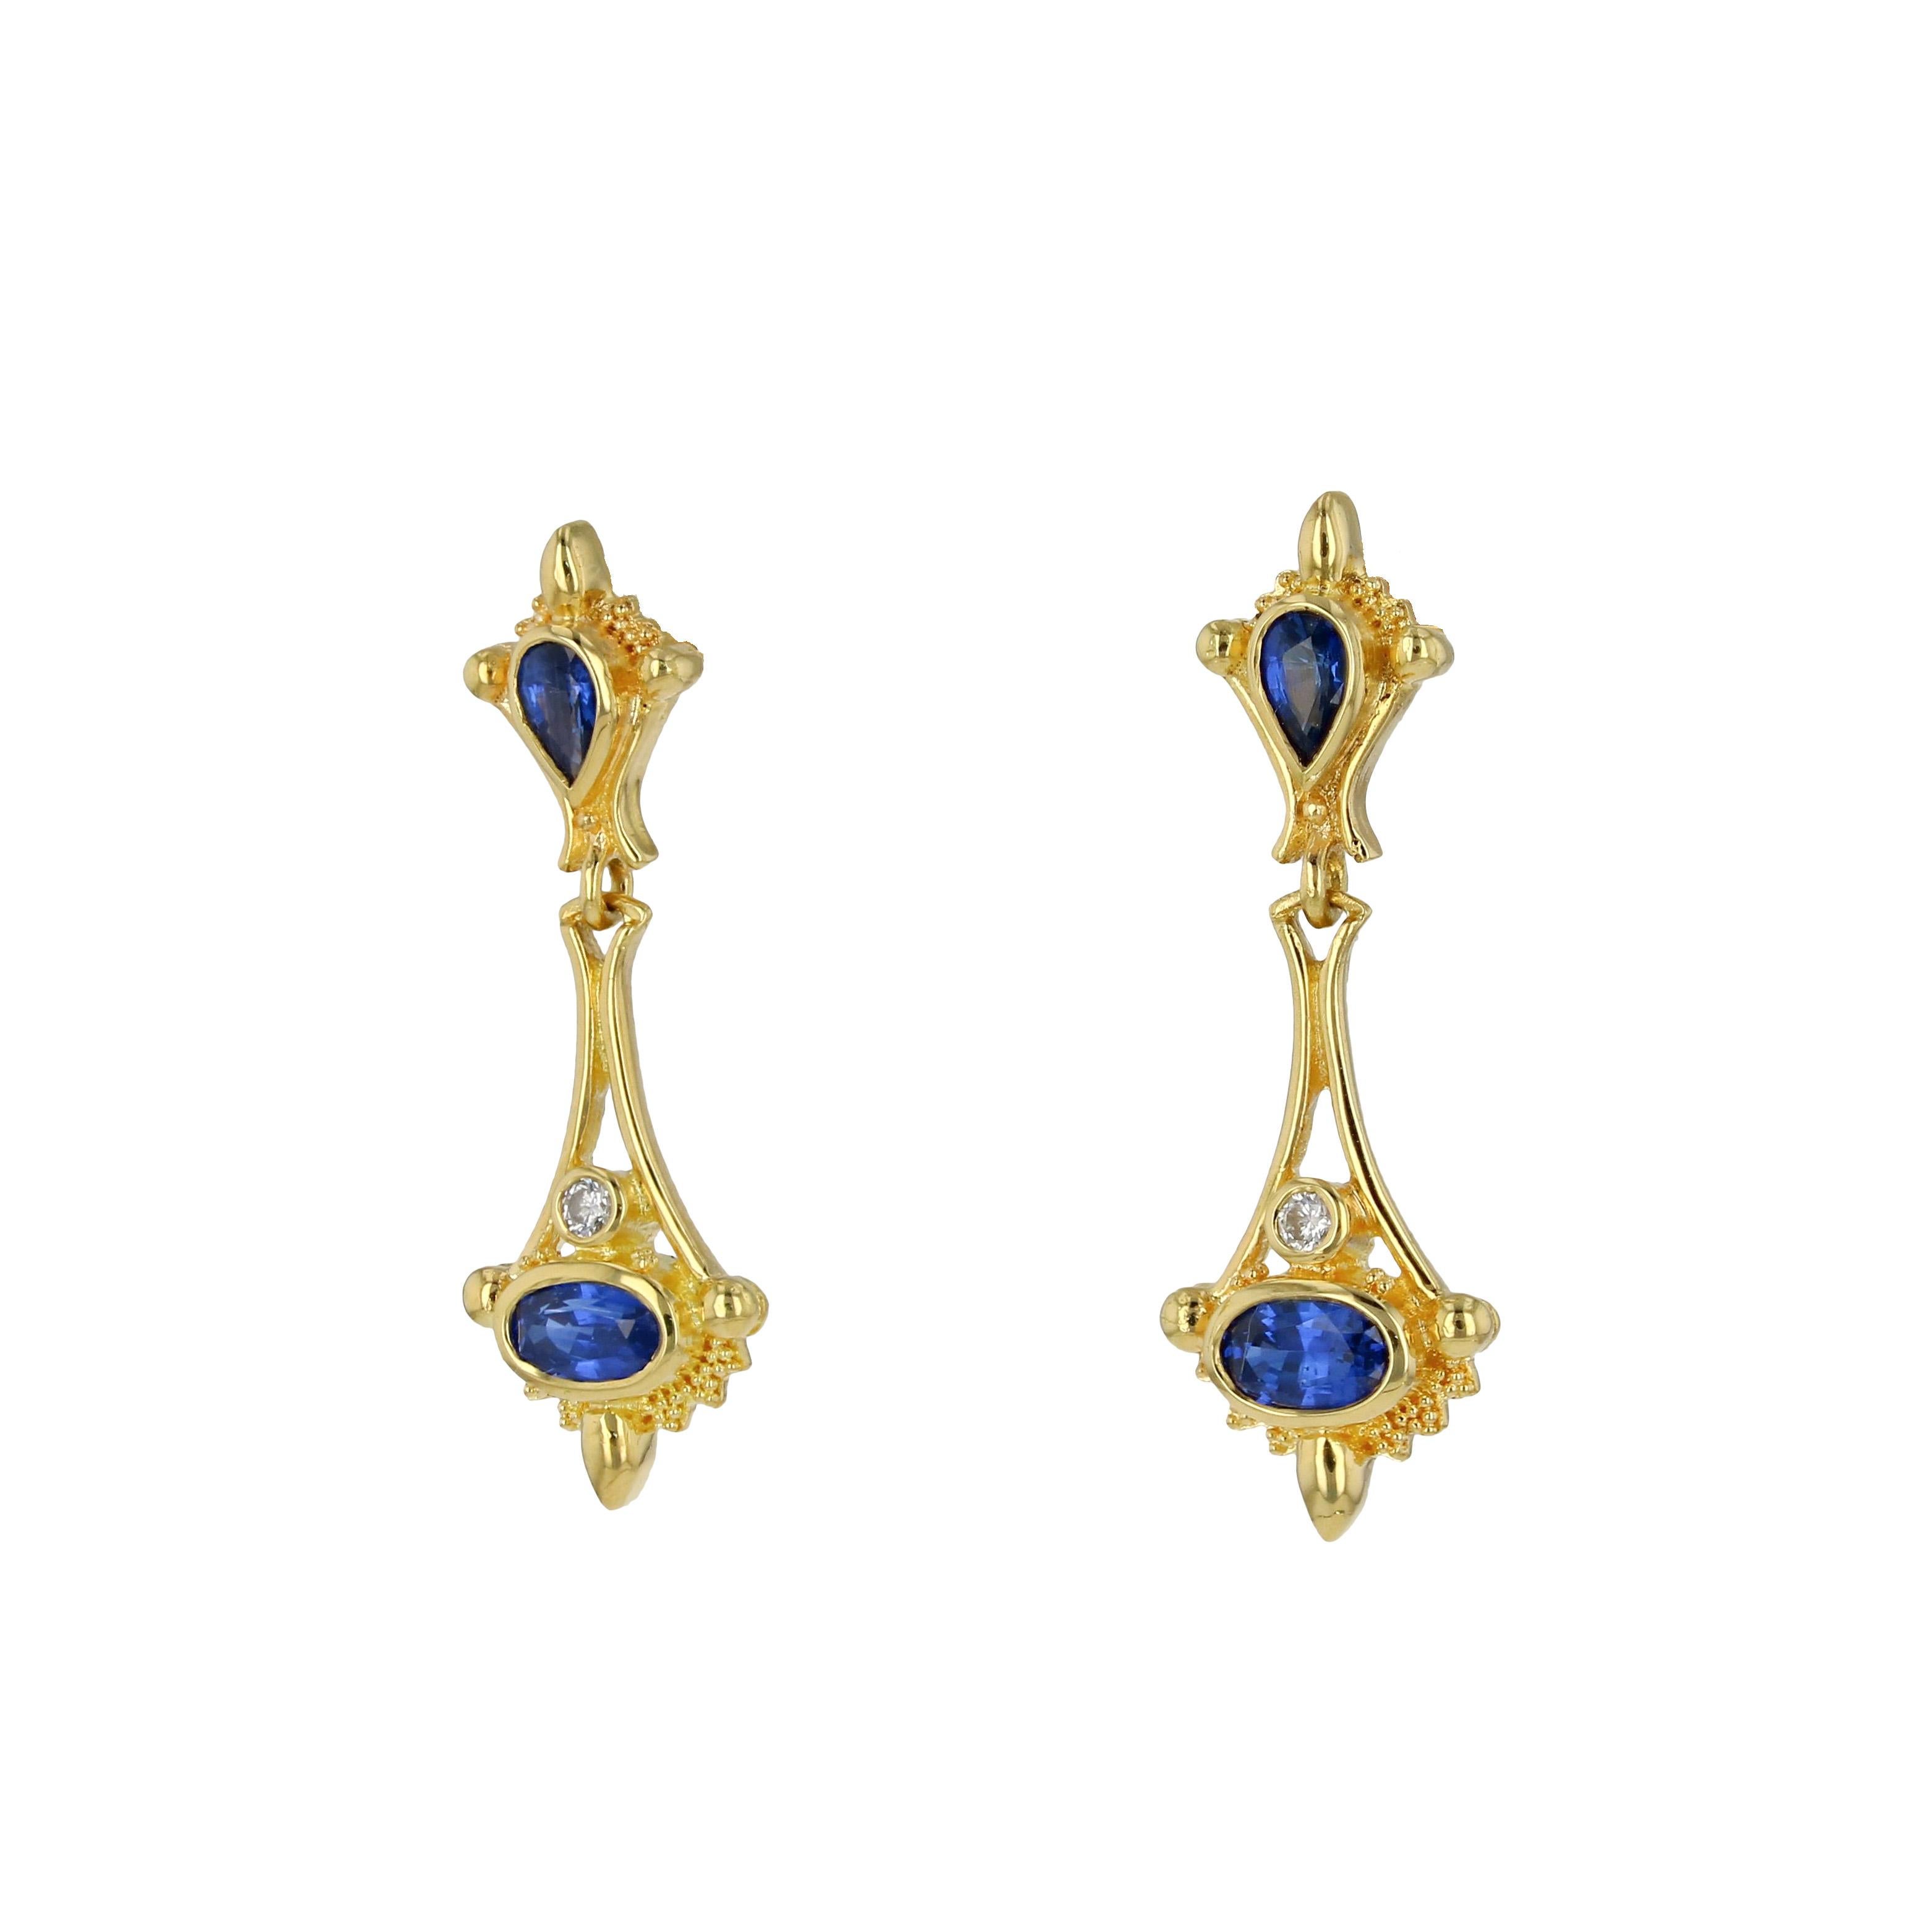 From the Kent Raible limited edition 'Studio Collection' we share with you the Blue Sapphire and Diamond earrings. 

The lovely proportions and fine detail of these elegant earrings move easily from day wear to a night out. 
The bottom portion of